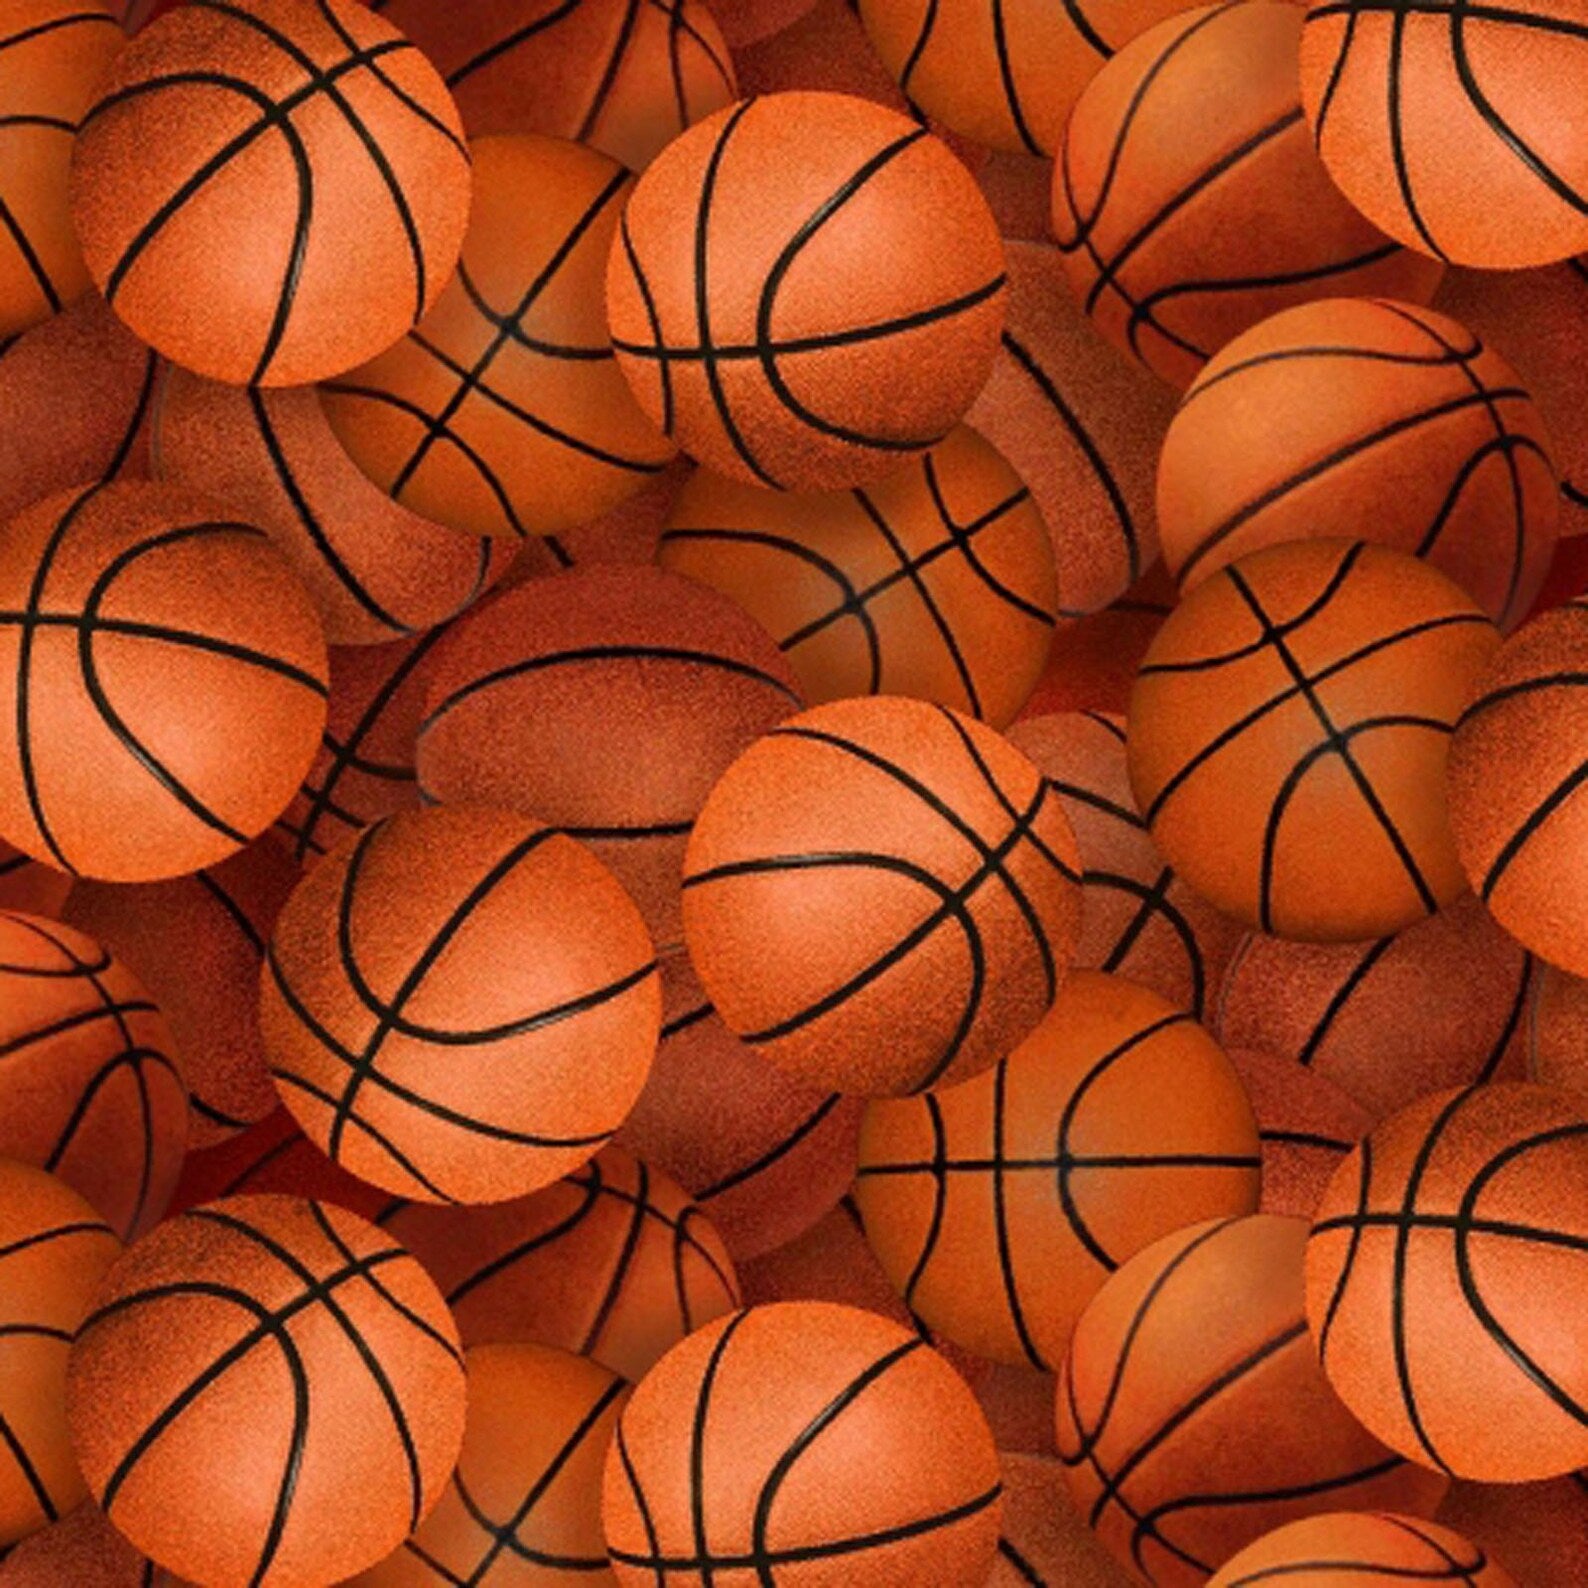 Sports Collection - Packed Basketballs - Orange